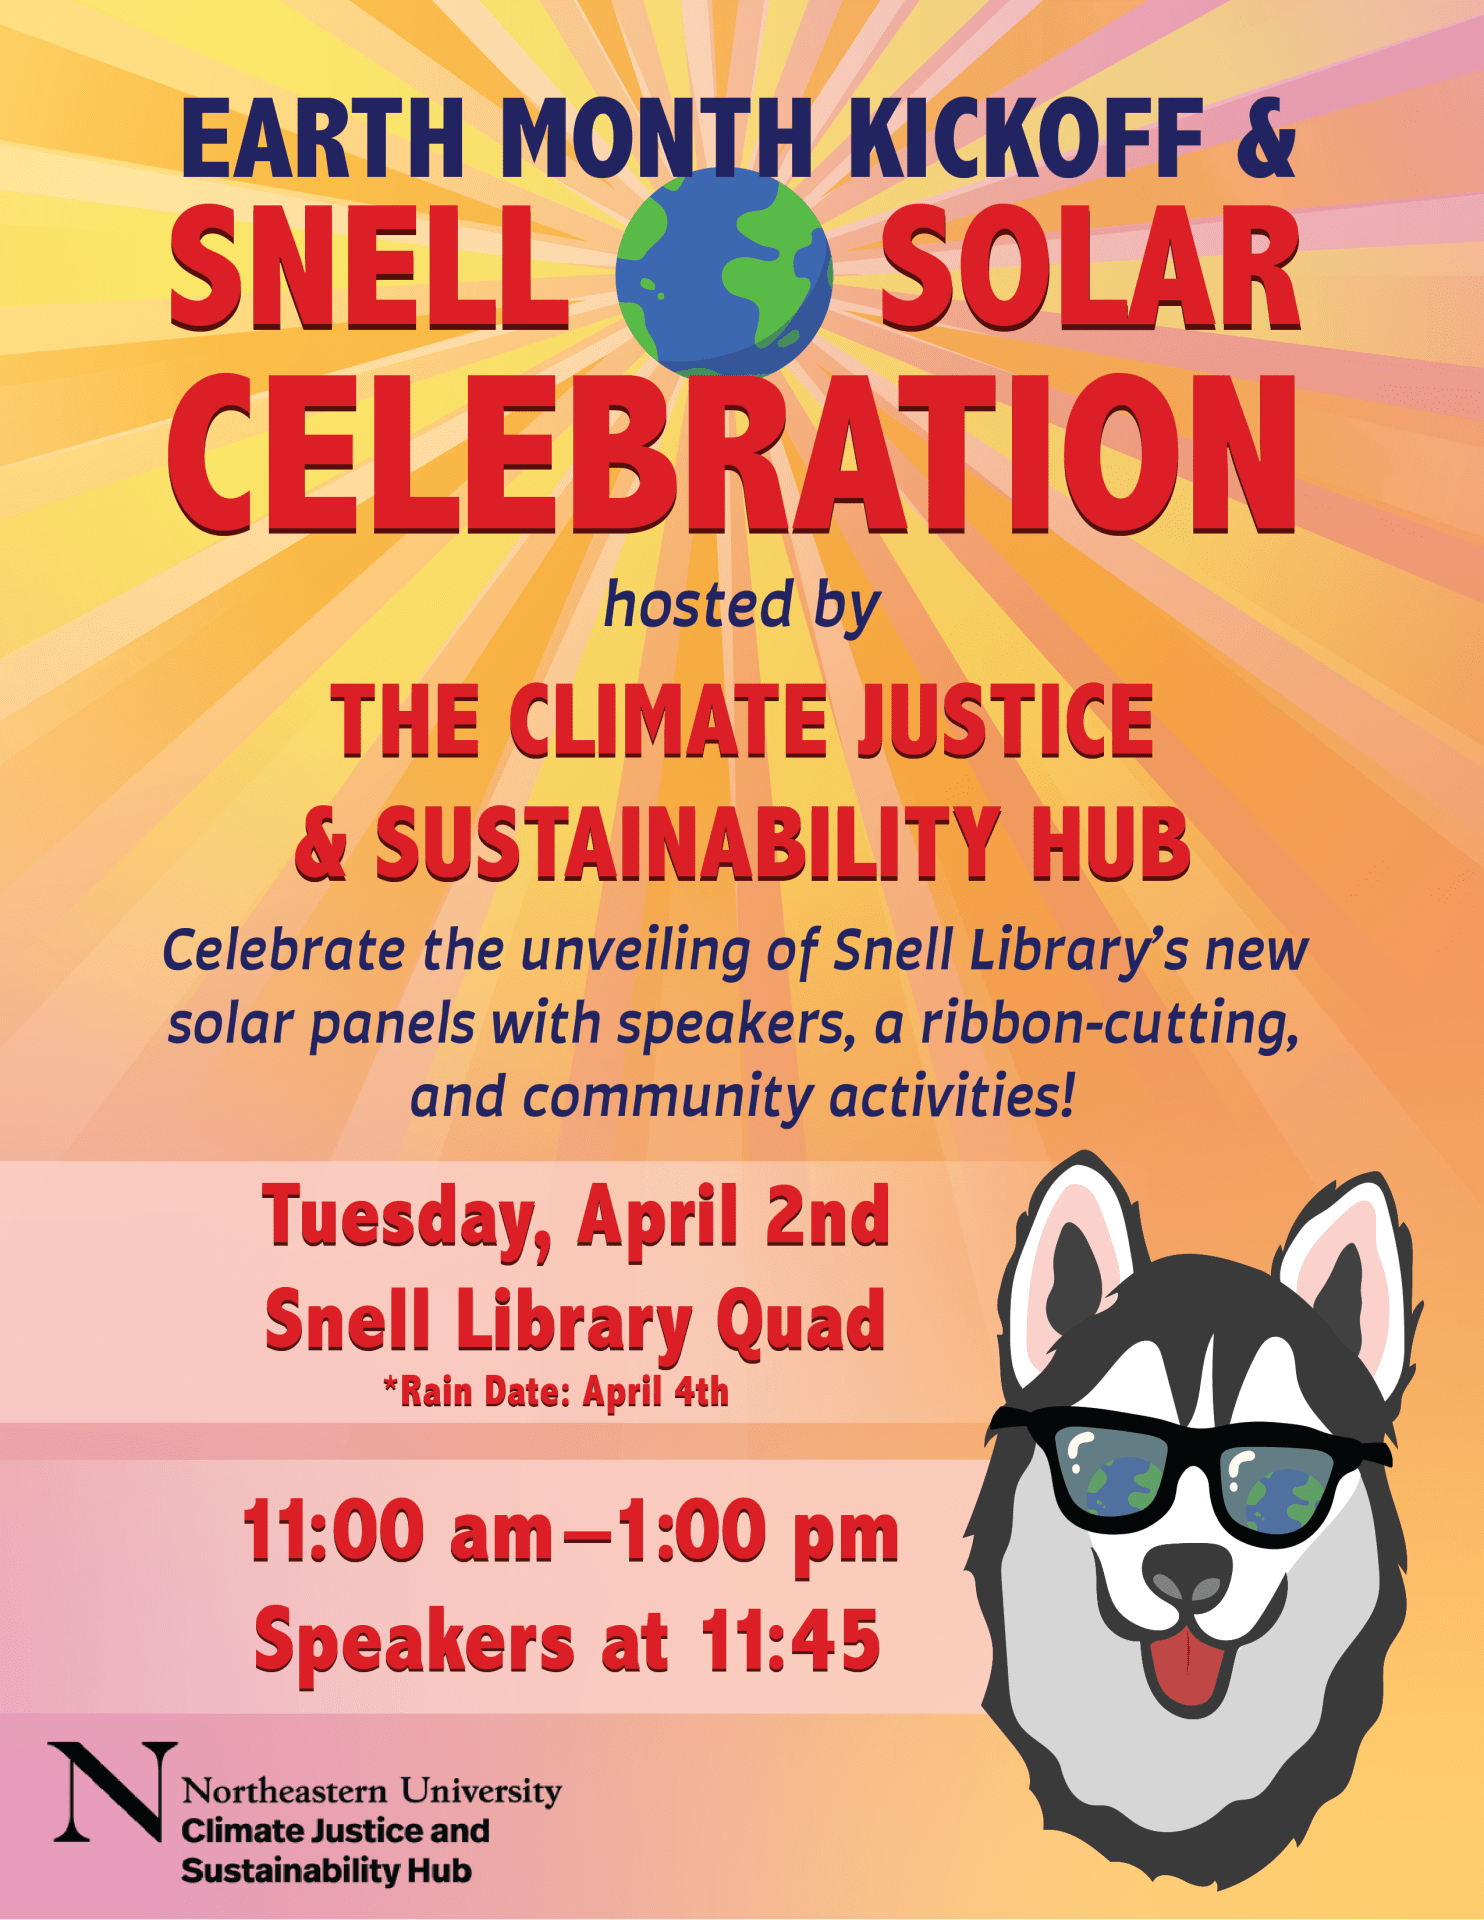 Earth Month Kickoff & Snell Solar Celebration flyer